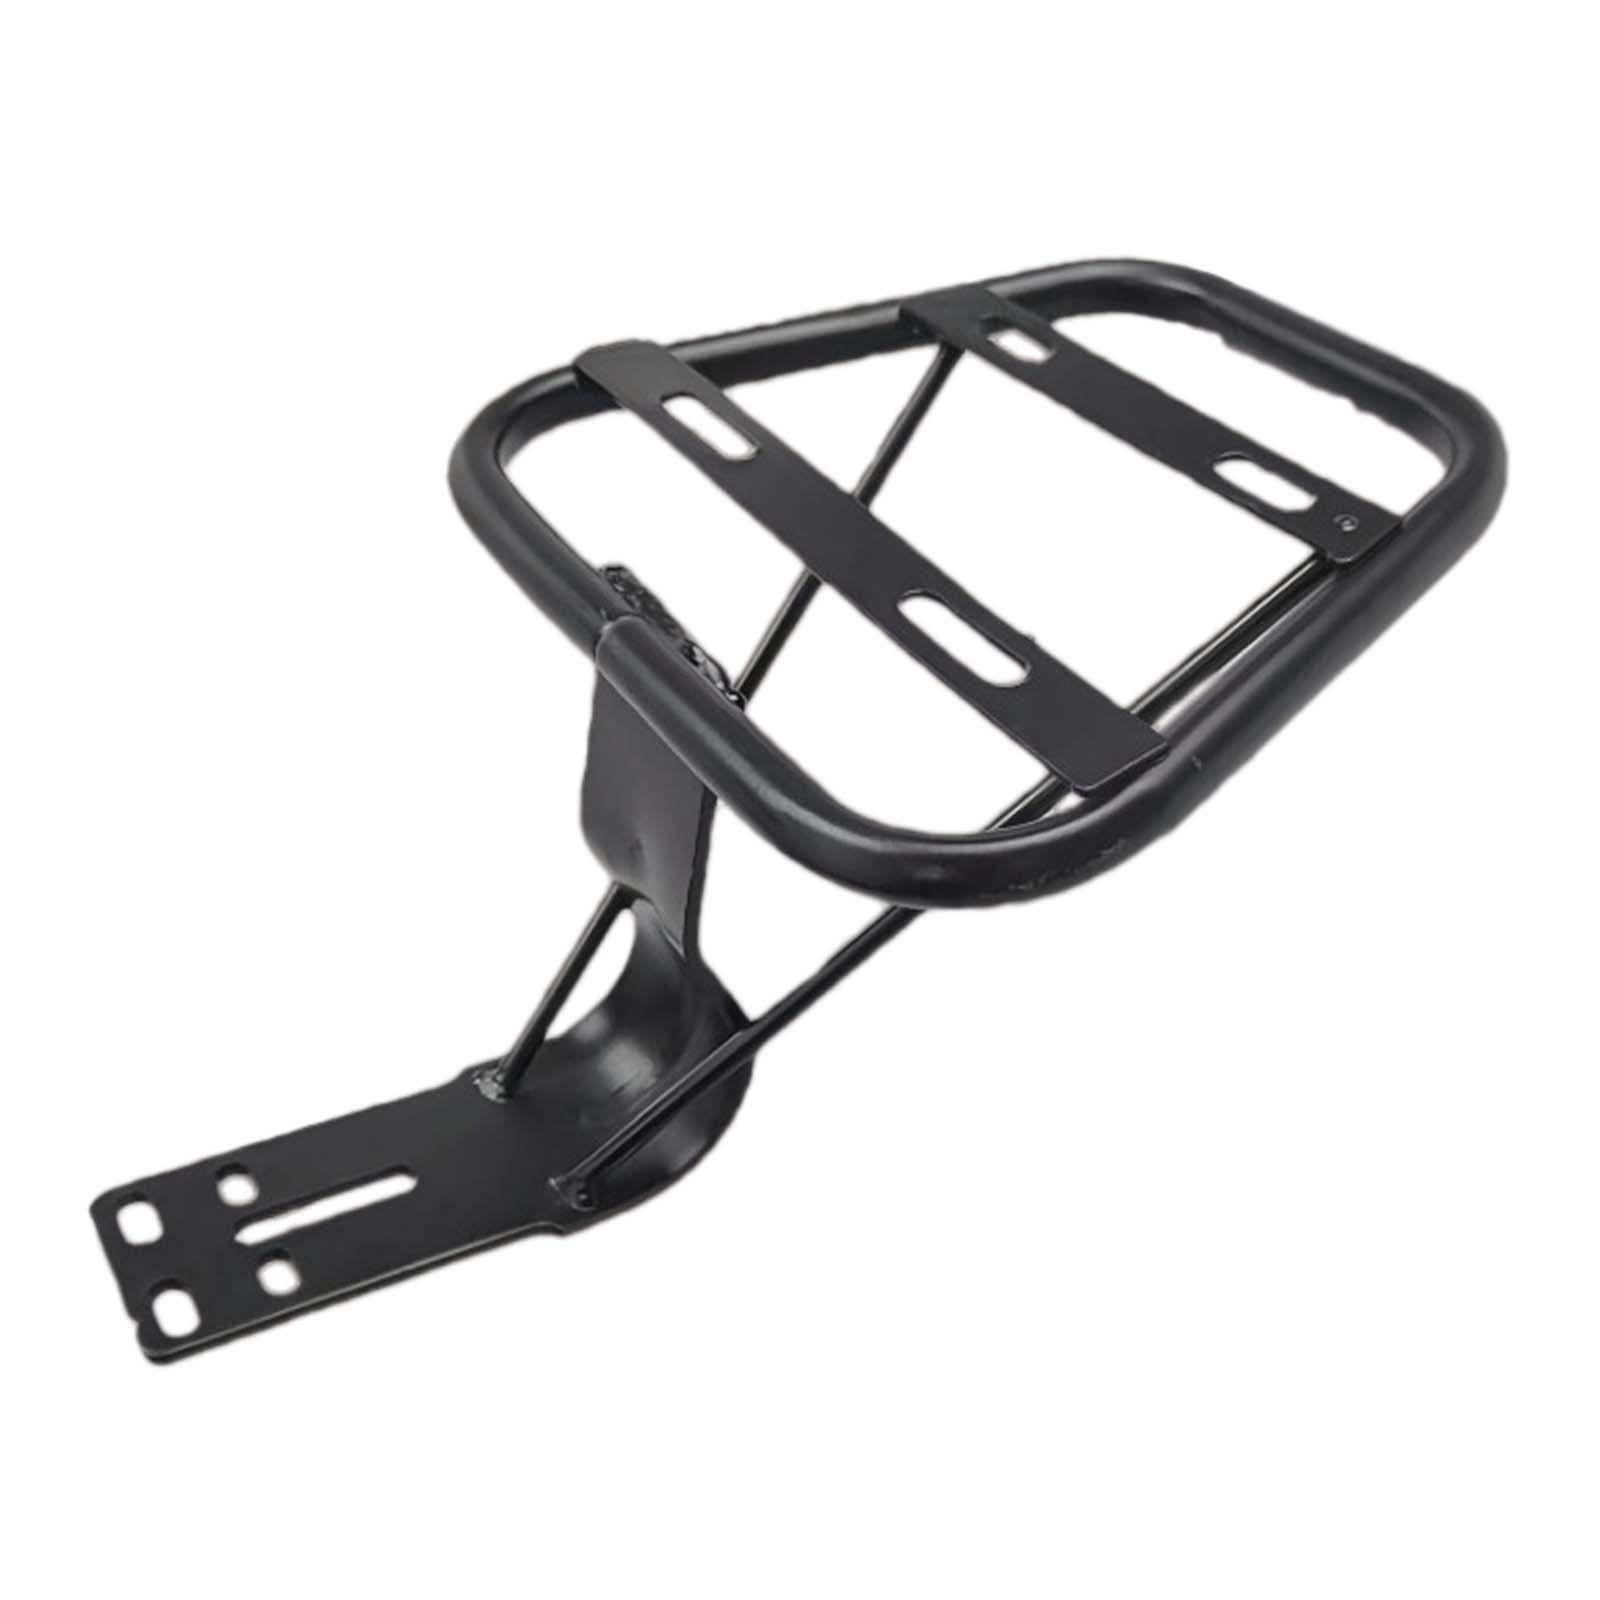 Motorbike Rear Tail Box Carrier Irone Accessories Sturdy Replace Basket Rack